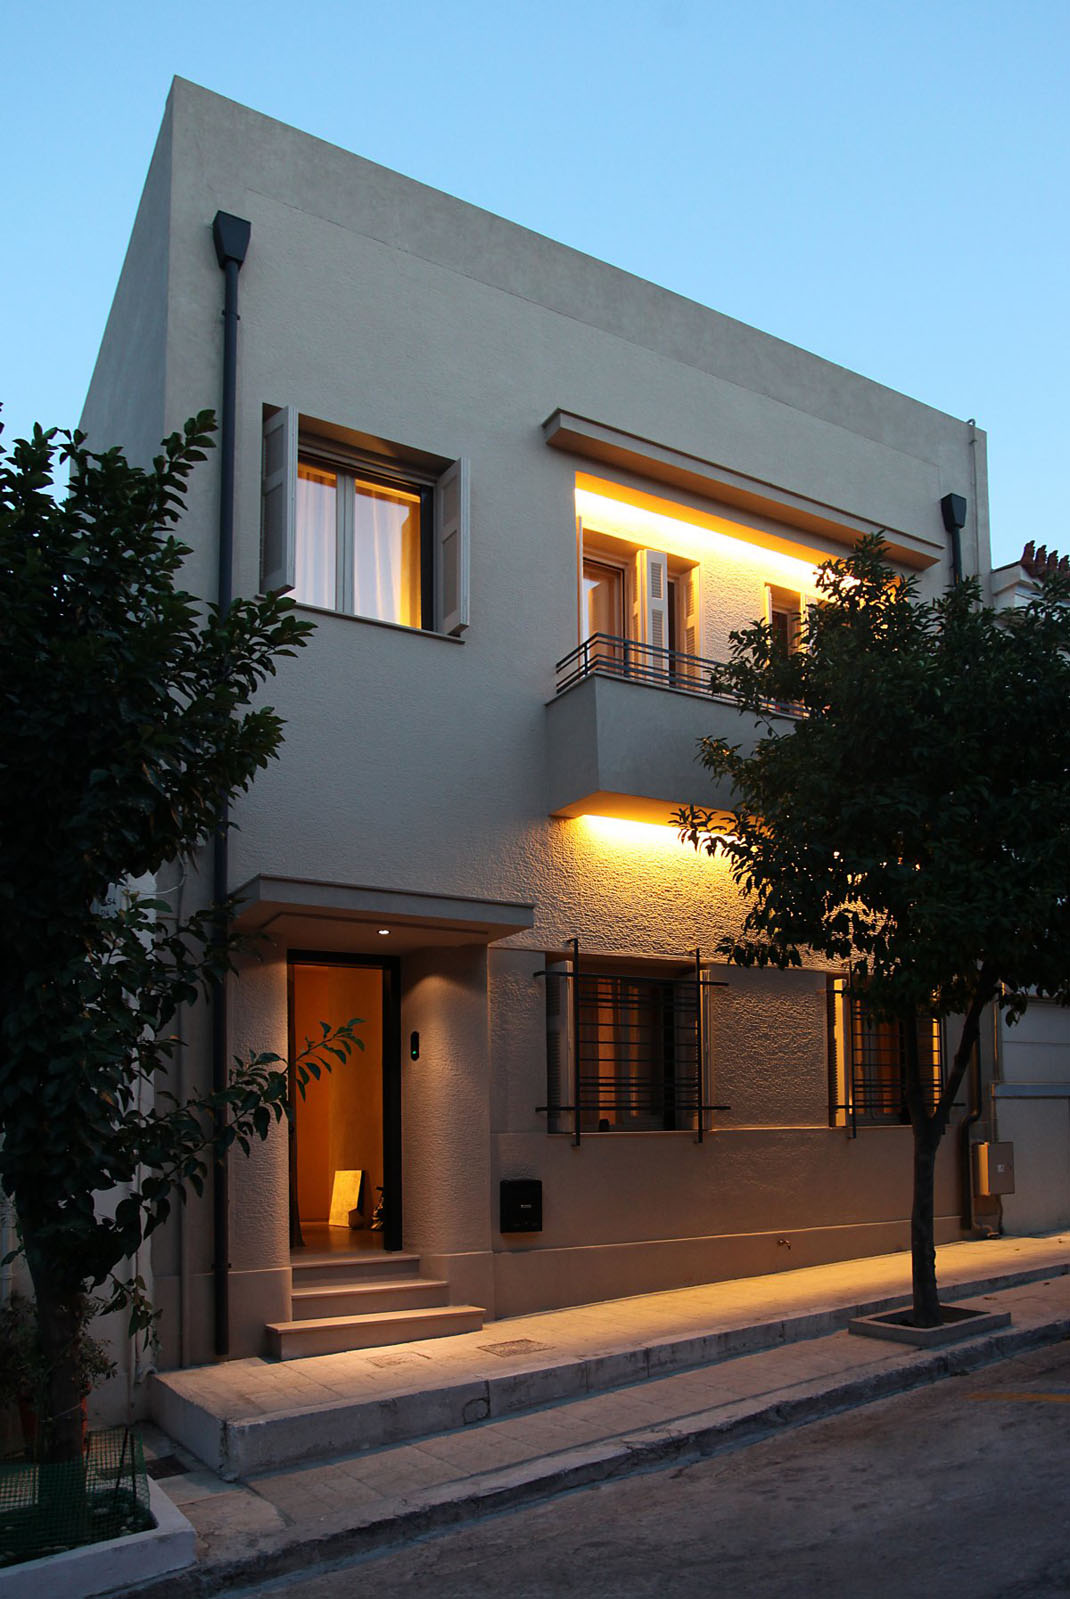 Elegant Renovated Home With Acropolis View | iDesignArch ...
